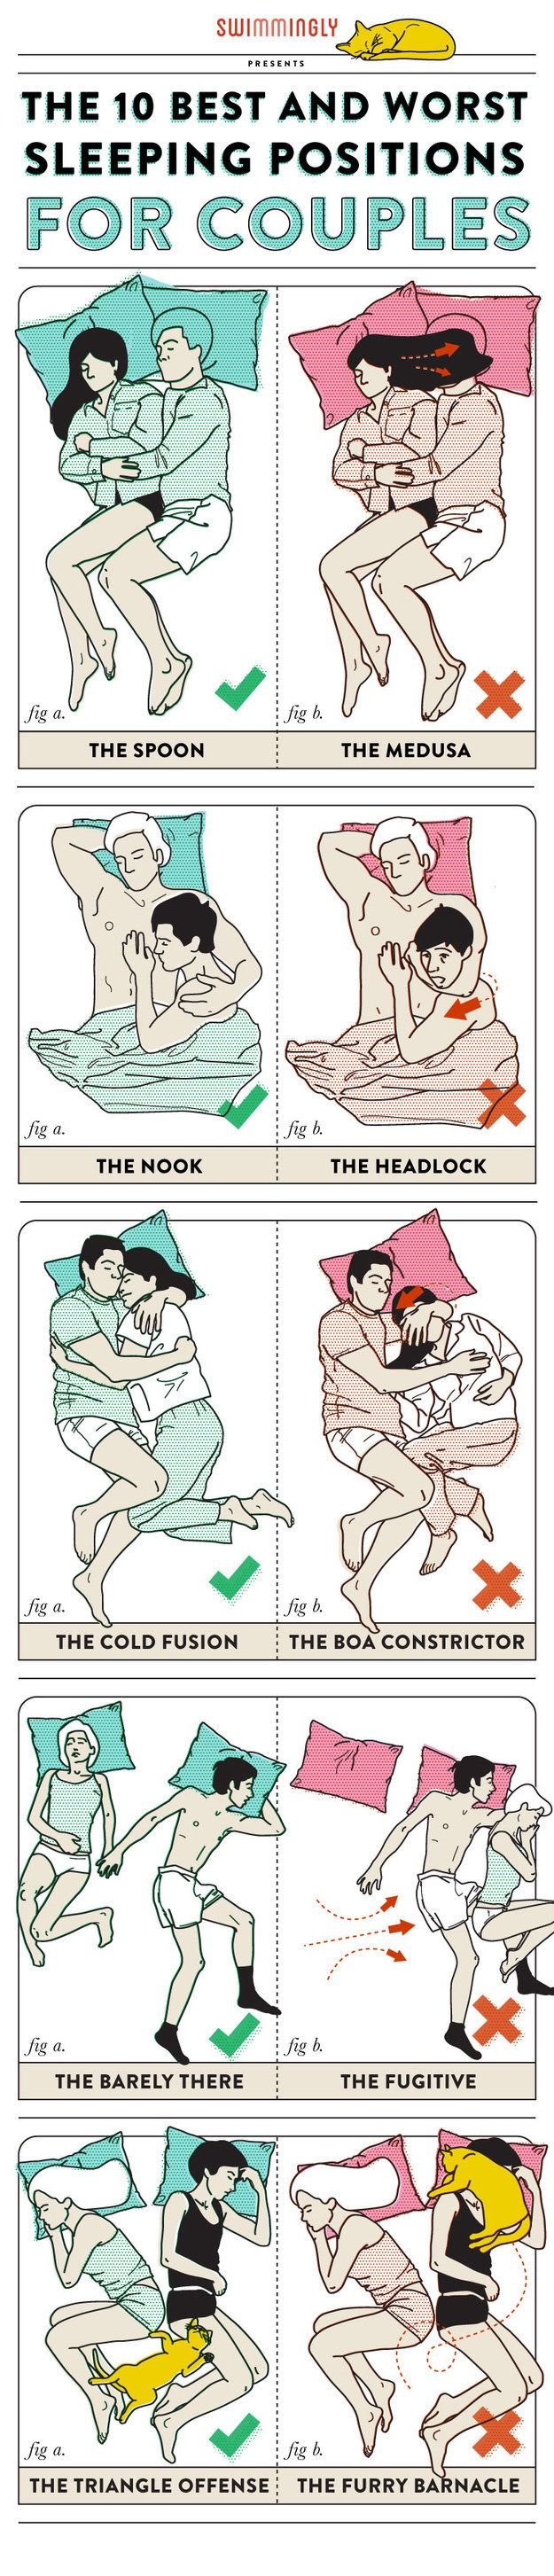 Best and worst sleeping positions for couples